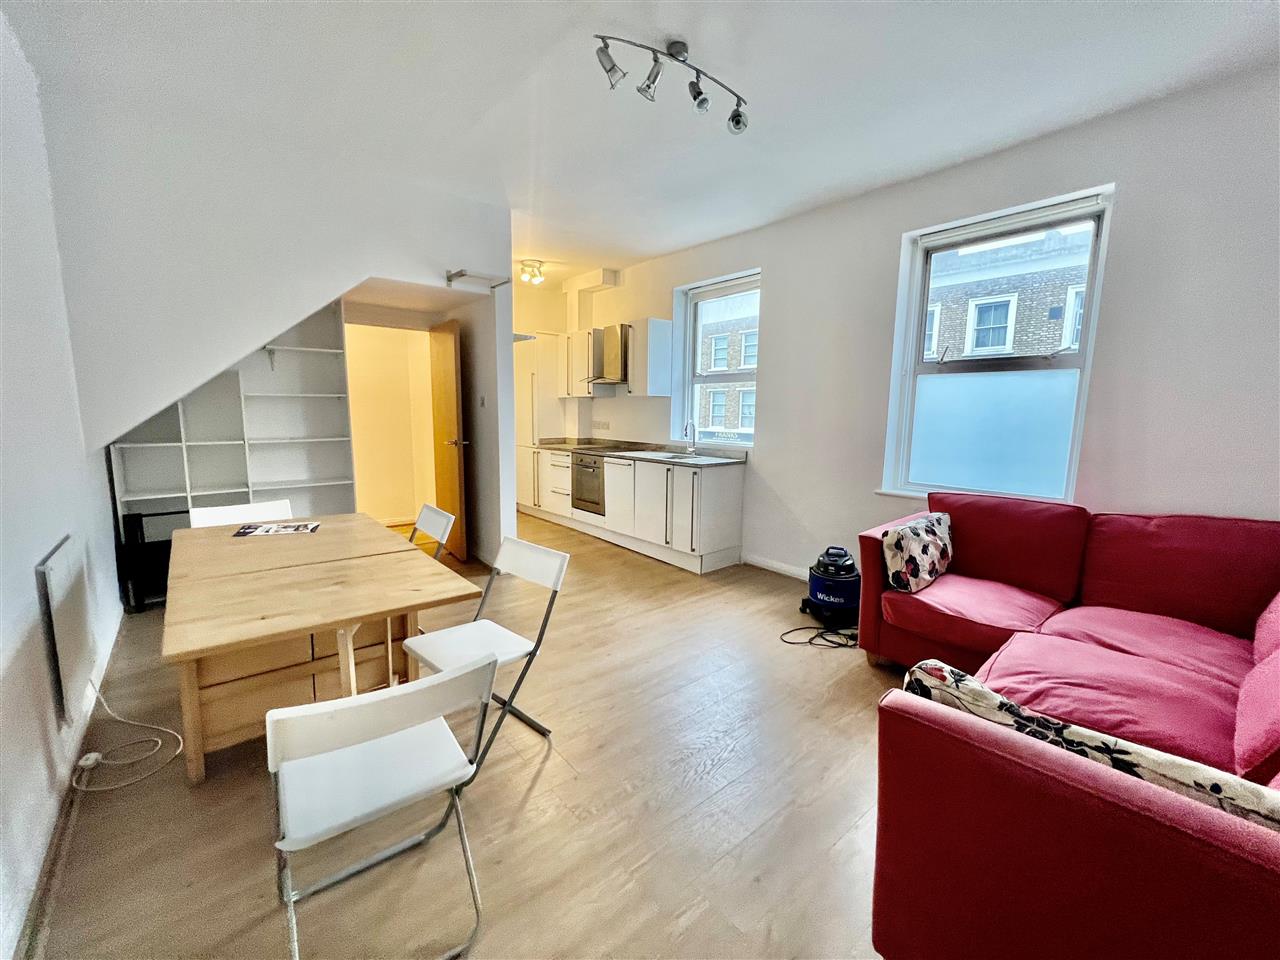 AVAIABLE IMMEDIATELY! Located above commercial premises is this PARTIALLY RE- DECORATED modern and stylish first floor PART FURNISHED converted apartment within walking distance of Kentish Town and Belsize Park and close to the wide open spaces of Hampstead Heath. The accommodation comprises of ...